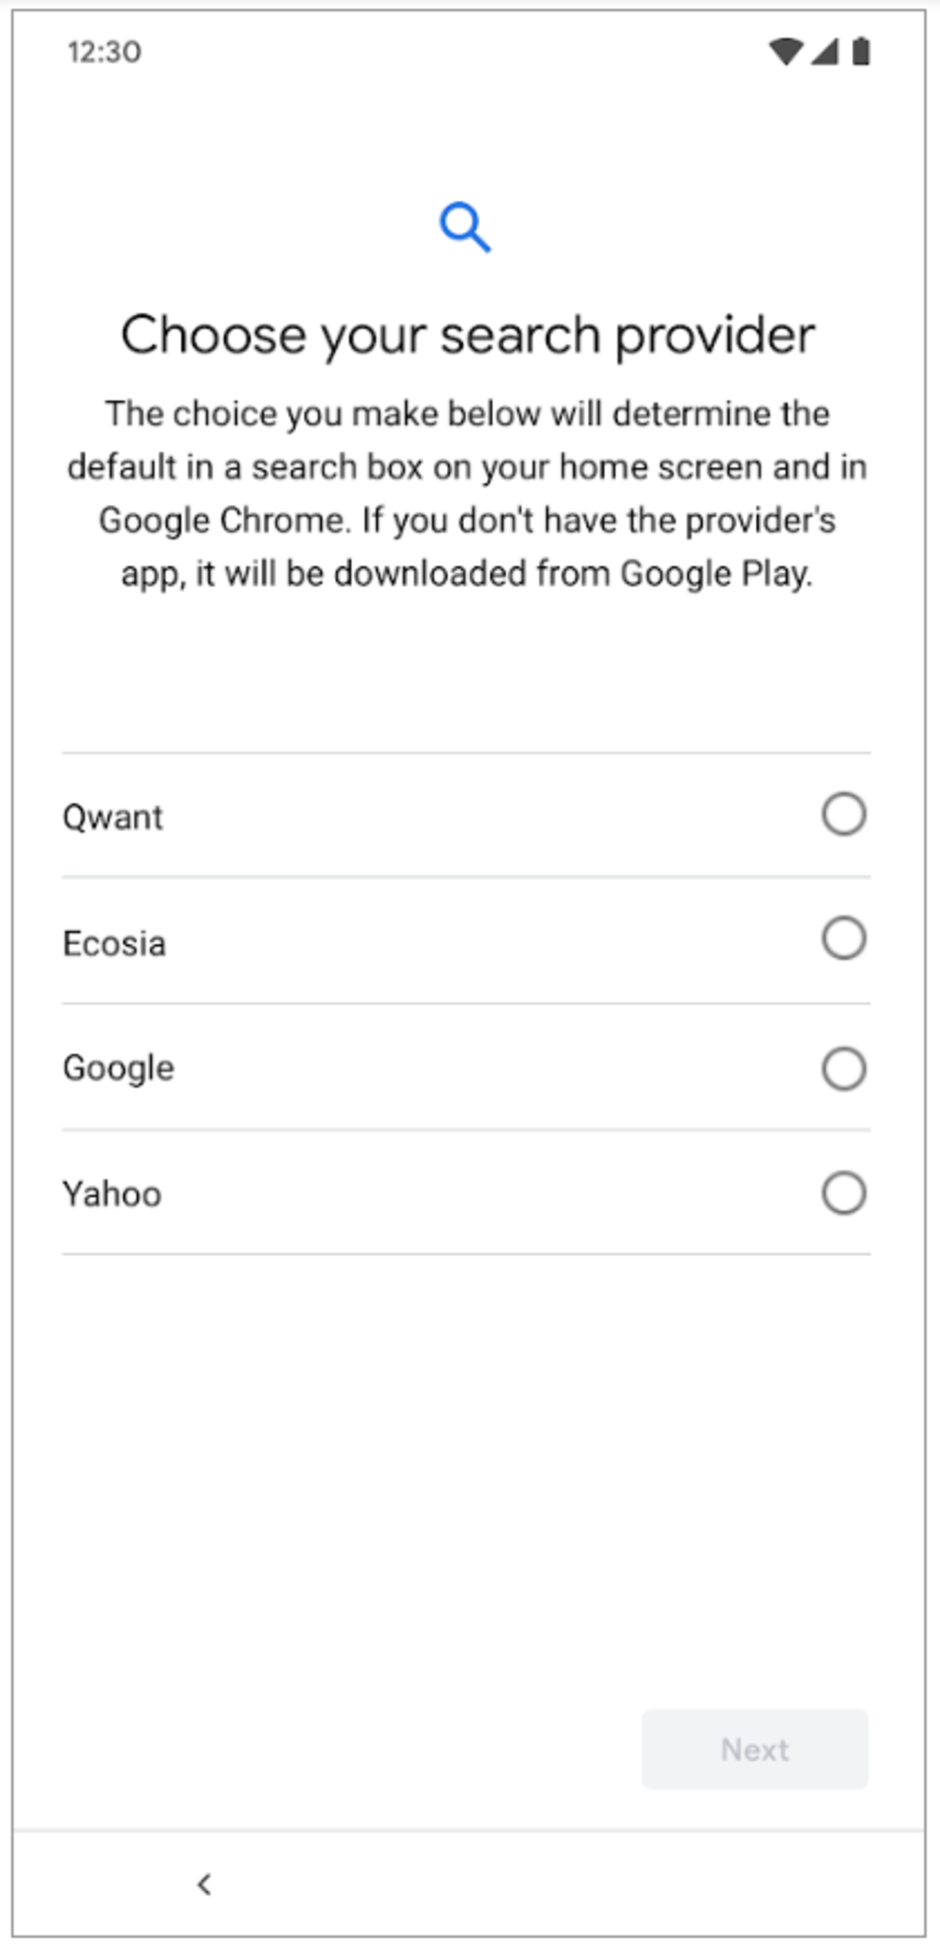 The new page users in Europe will see when setting up their new Android smartphone - Google to make changes it really doesn't want to, at least in one region